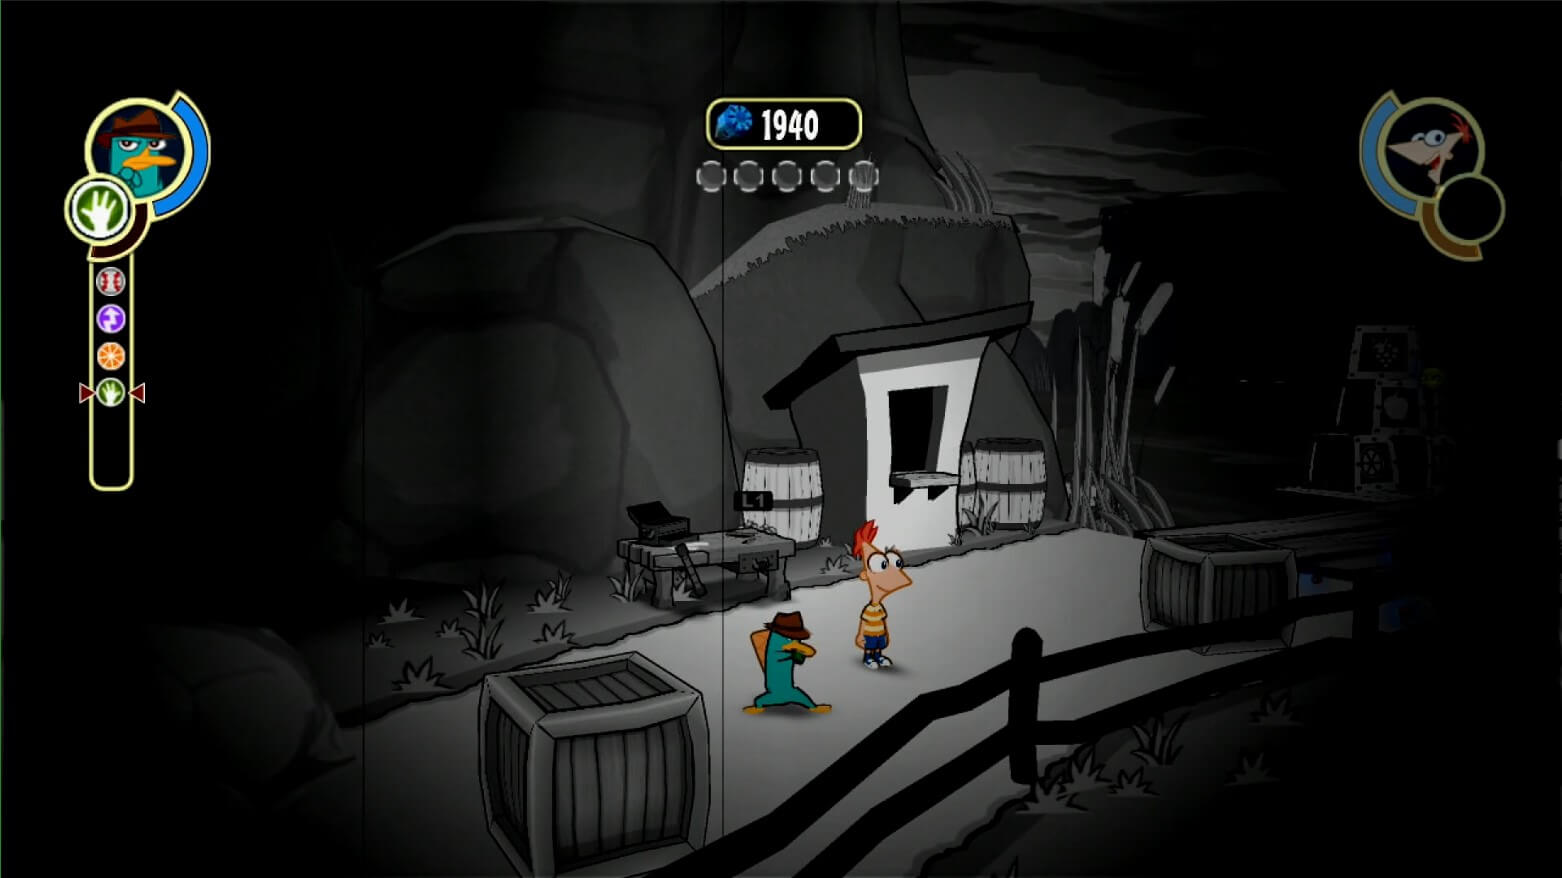 Phineas and Ferb Across the 2nd Dimension - геймплей игры на PlayStation 3